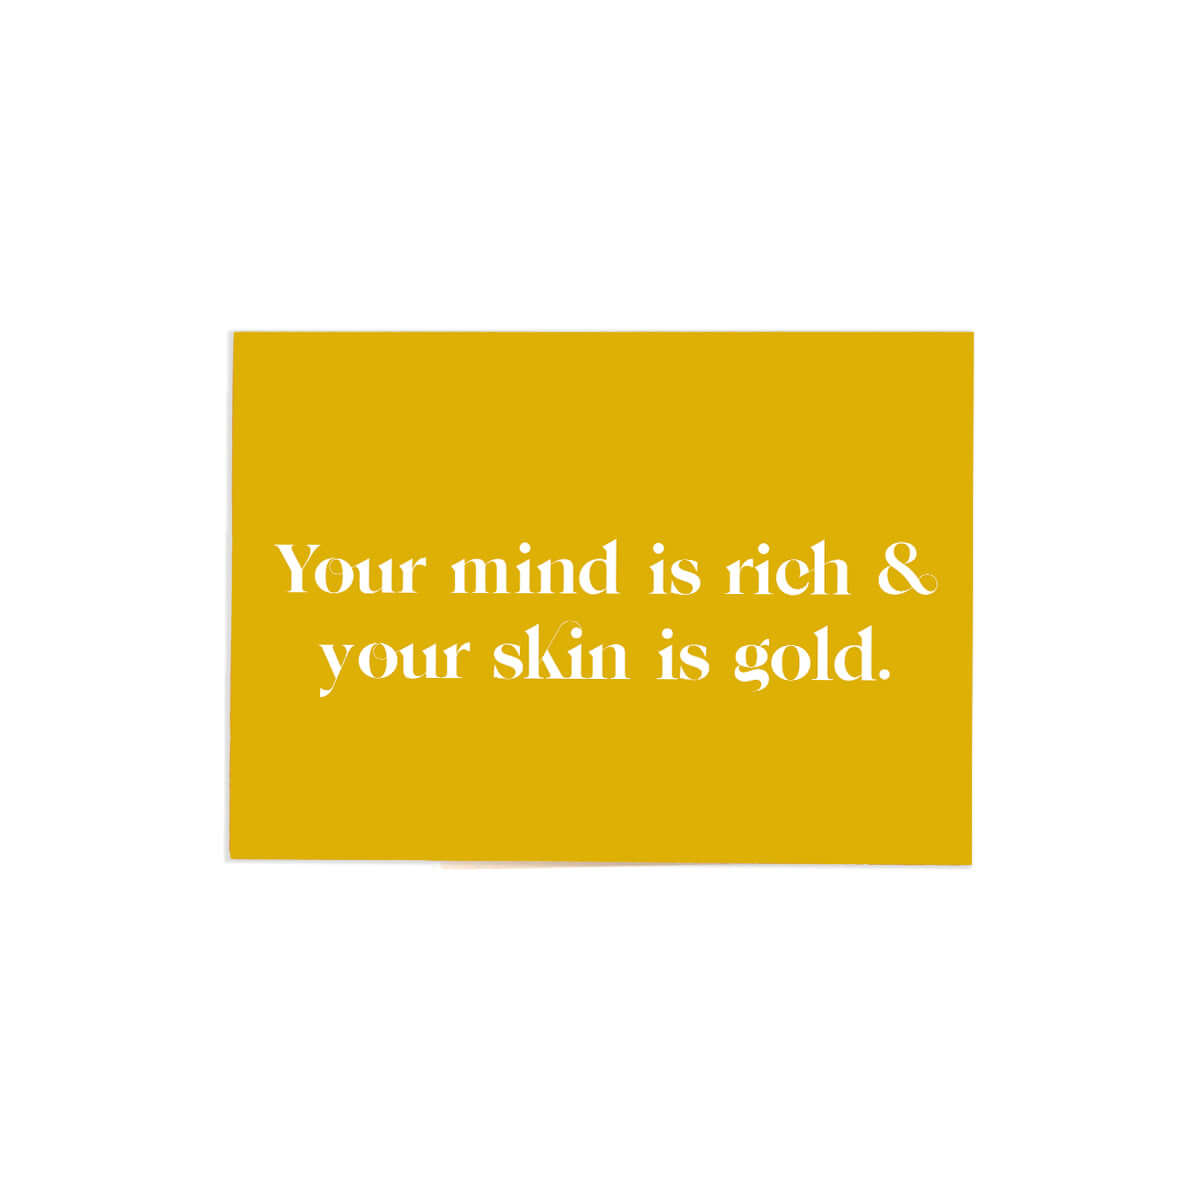 Yellow Greeting card with empowering affirmation: 'Your mind is rich and your skin is gold